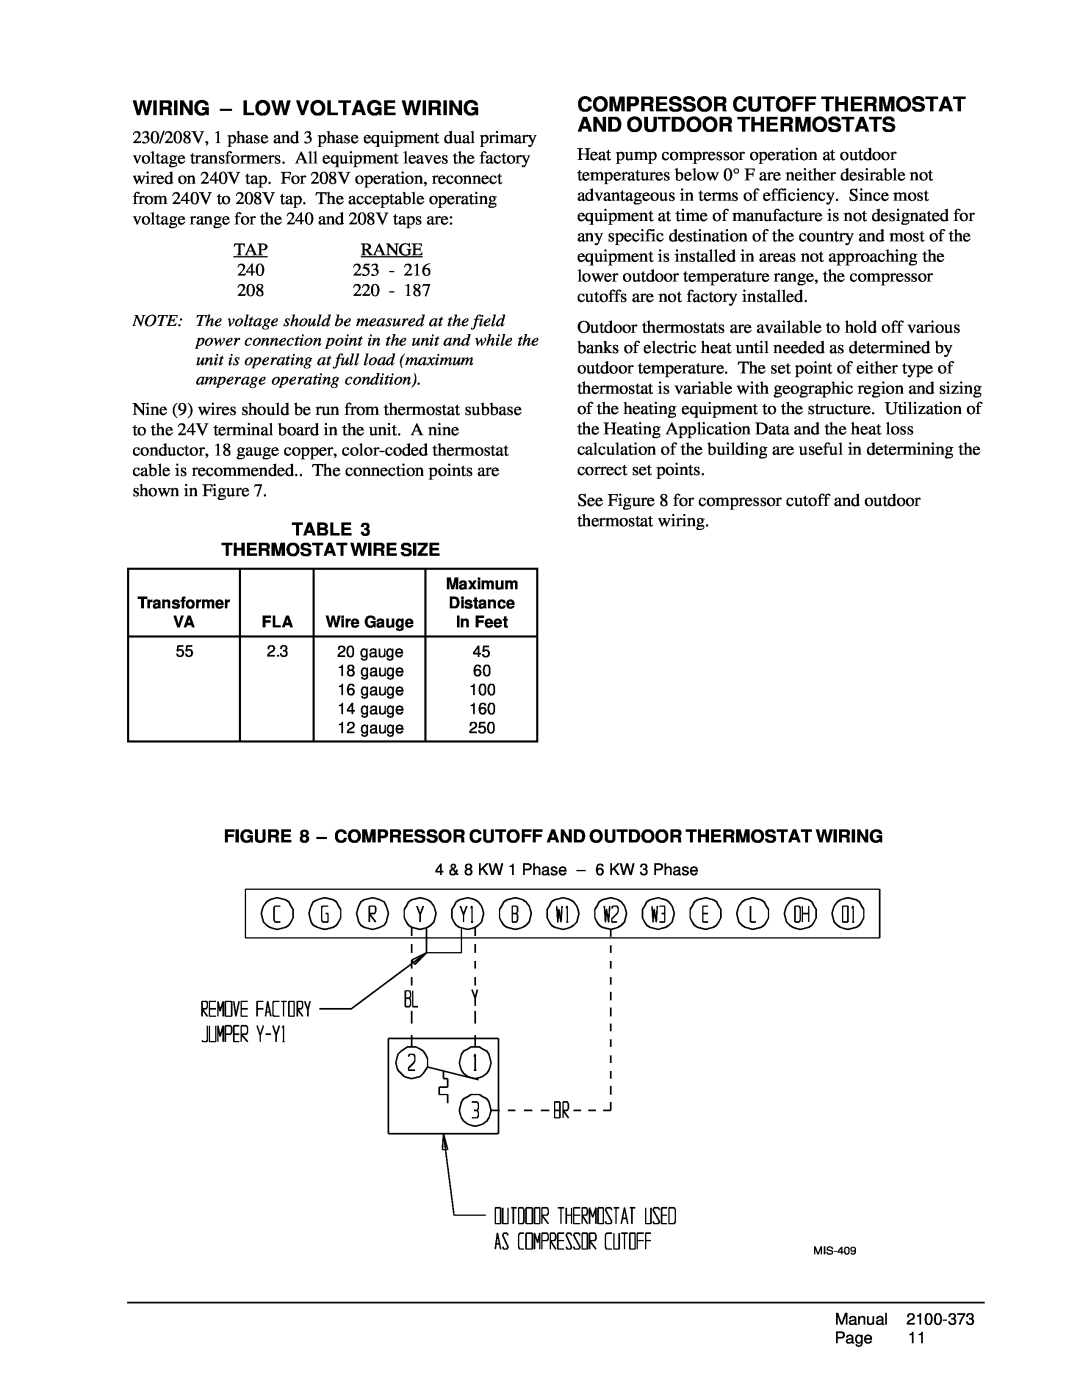 Bard WH183, WH242 installation instructions Wiring - Low Voltage Wiring, Table Thermostat Wire Size 